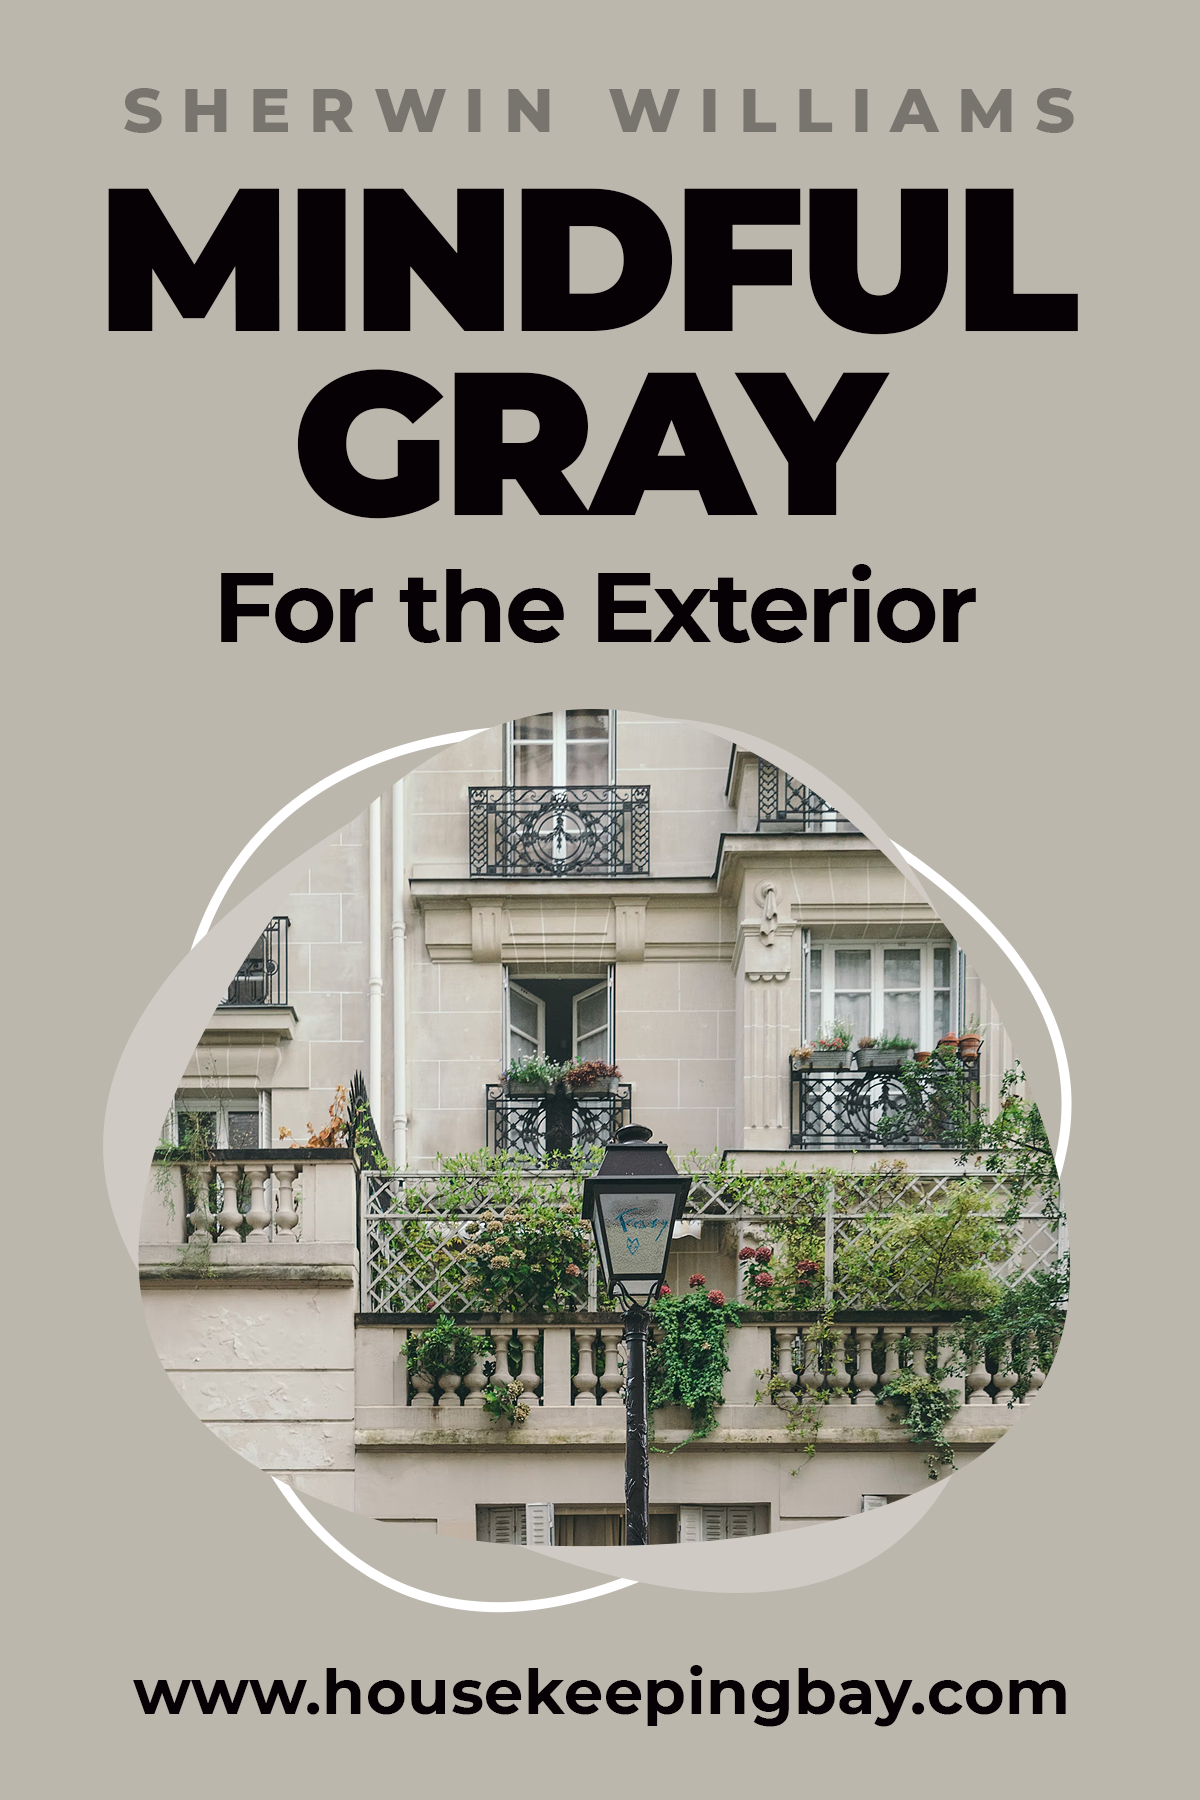 Mindful Gray for the Exterior